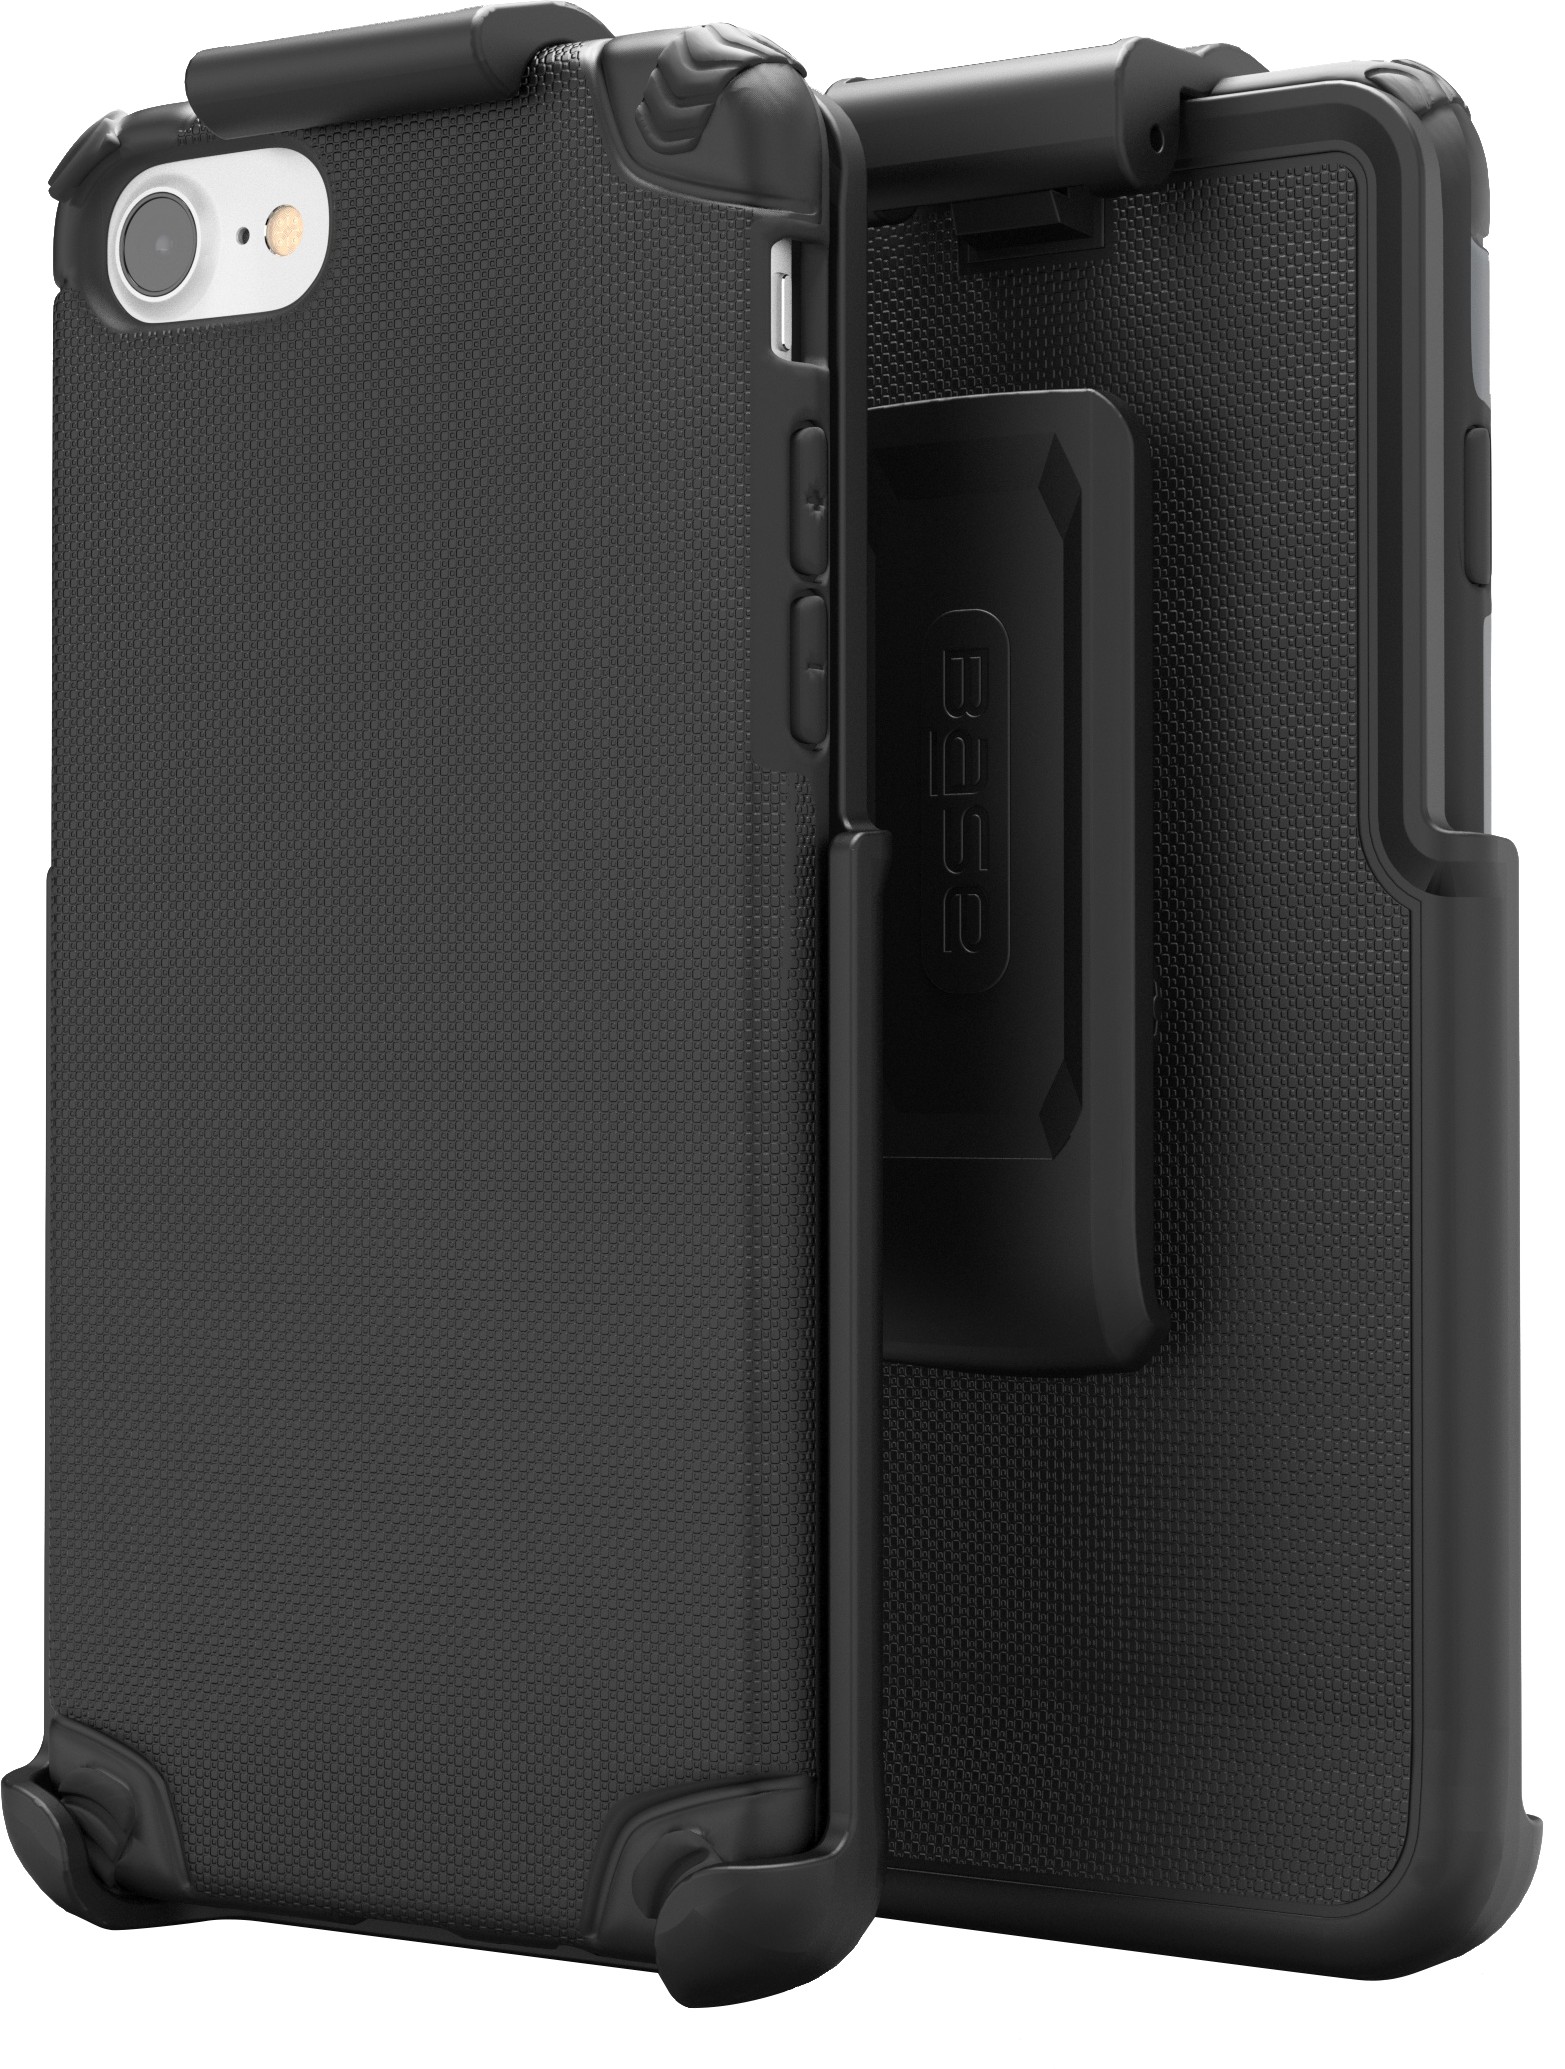 Base ProTech - Case & Holster Combo for iPhone 7/8 Plus - Black